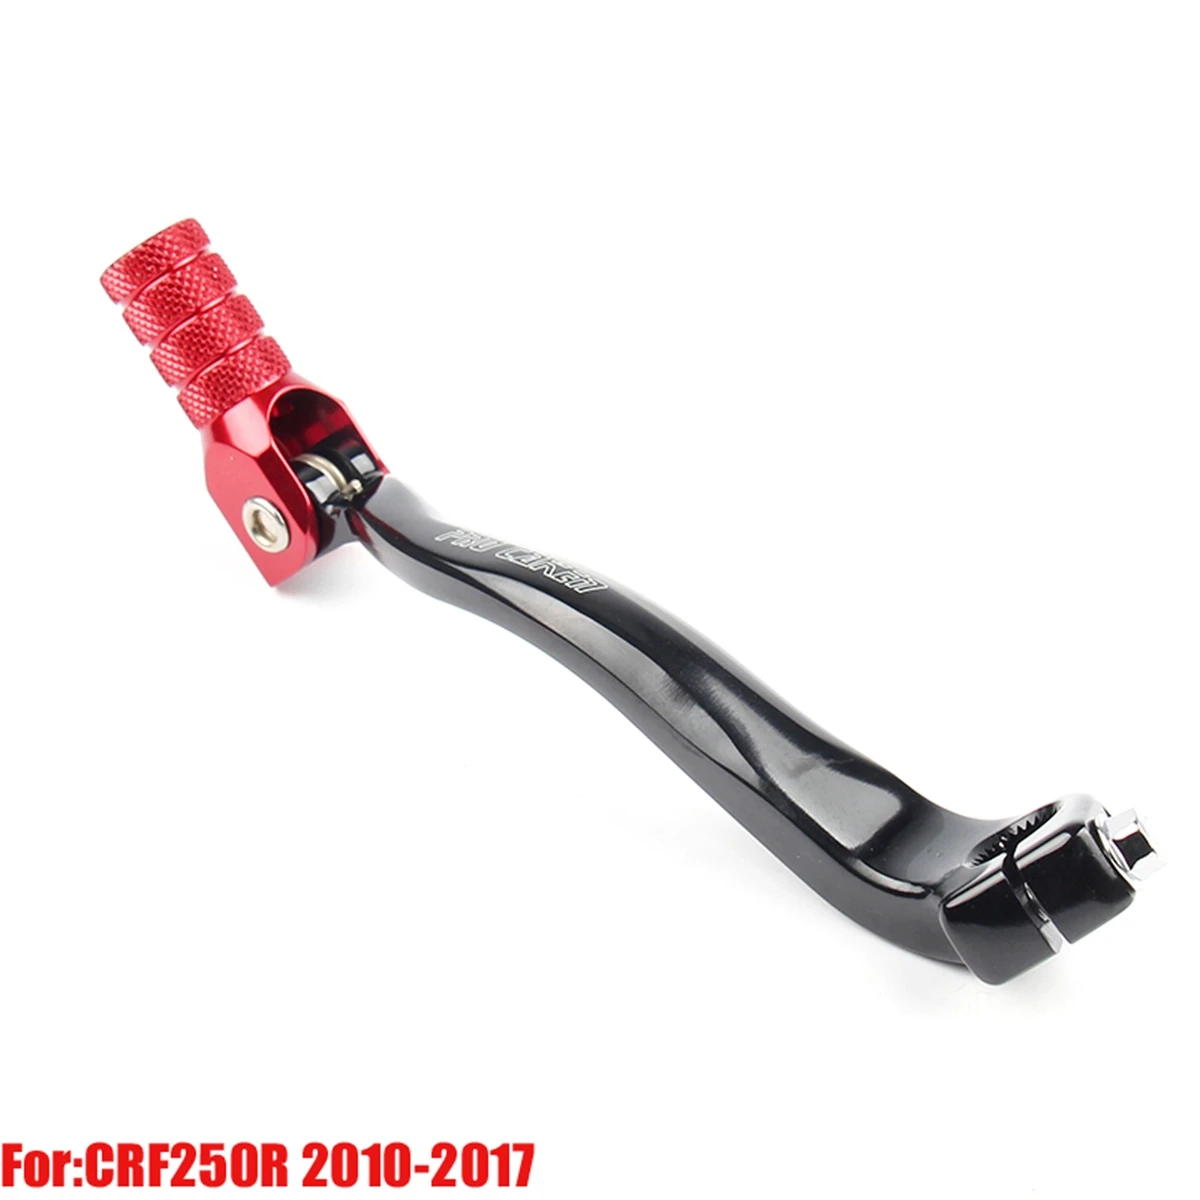 

CNC Aluminum alloy Gear Shifter Lever For Honda CRF 250R CRF250R 2010 11 12 13 14 15 16- 2017 Motorcycle Dirt Bike